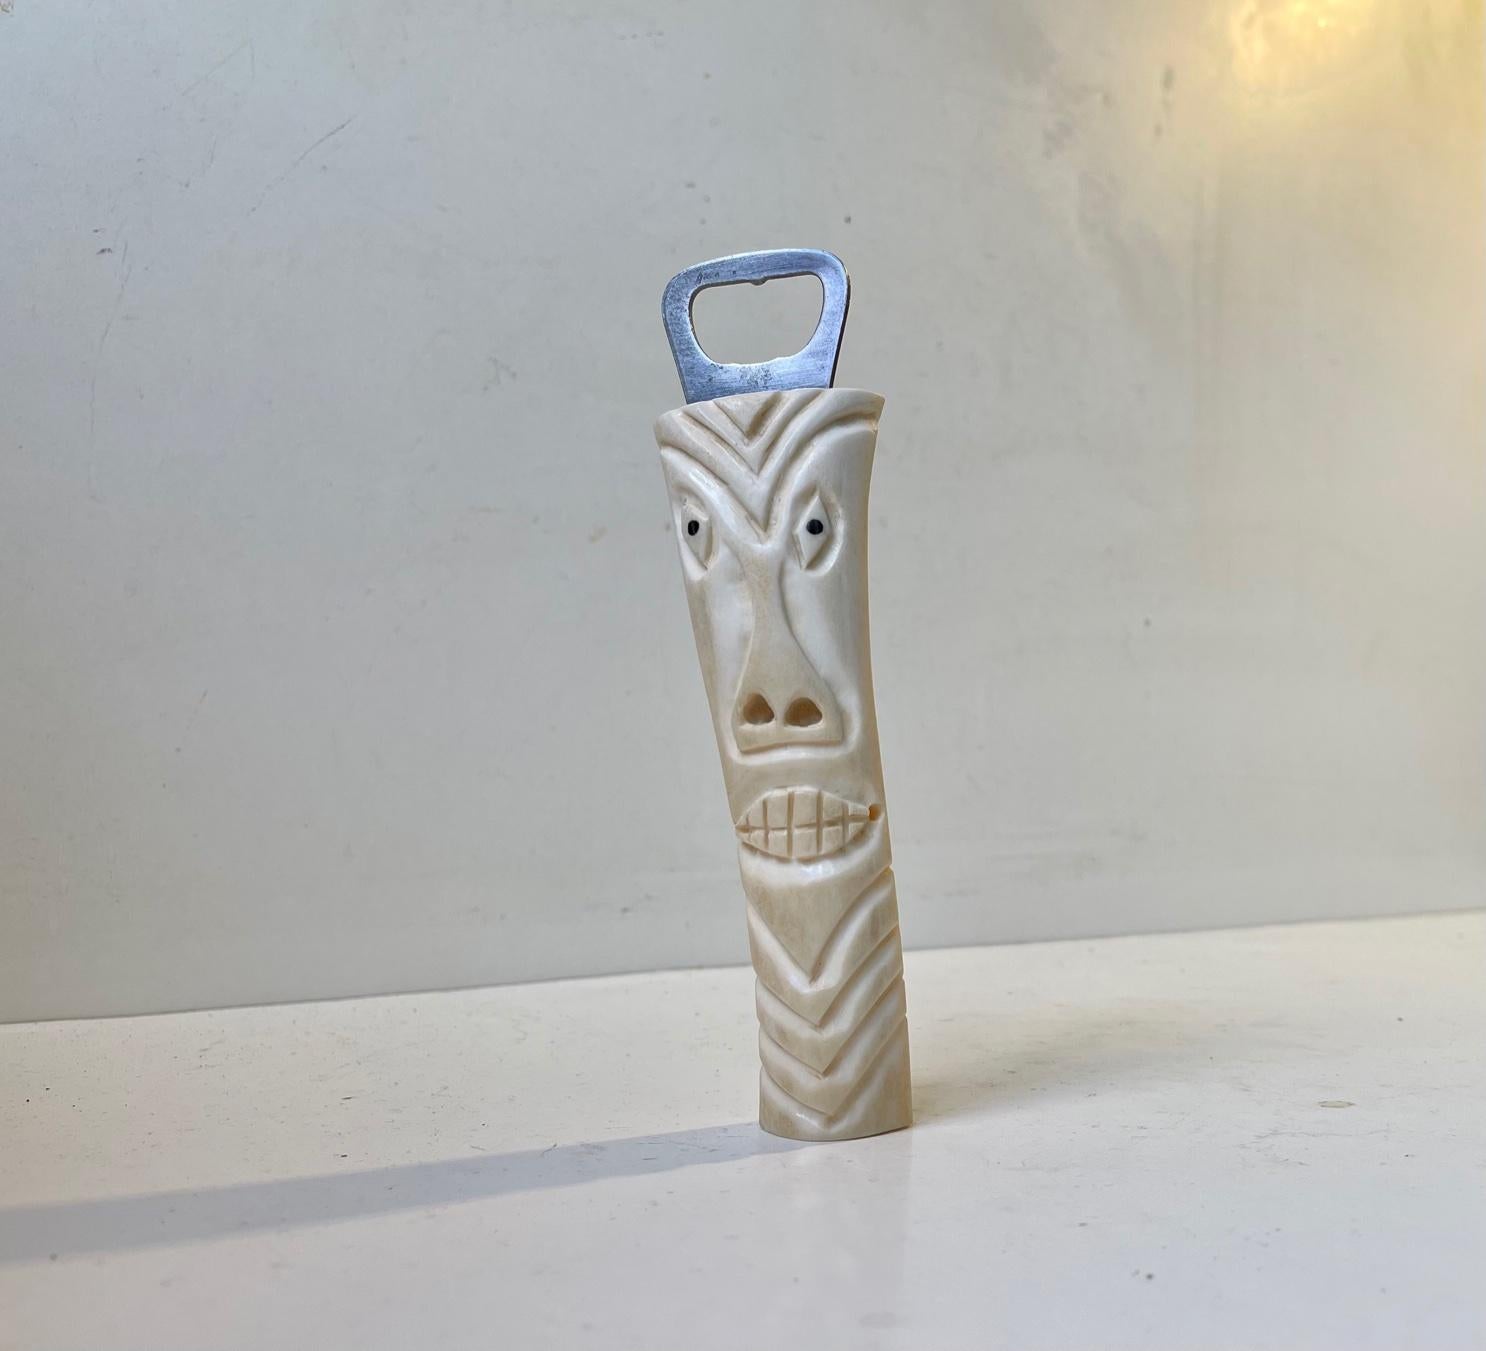 A figural bottle opener hand carved in white bone/tooth. Made at home by a creative Hunter in Greenland circa 1960-70. Measurements: H/L: 16.5 cm.